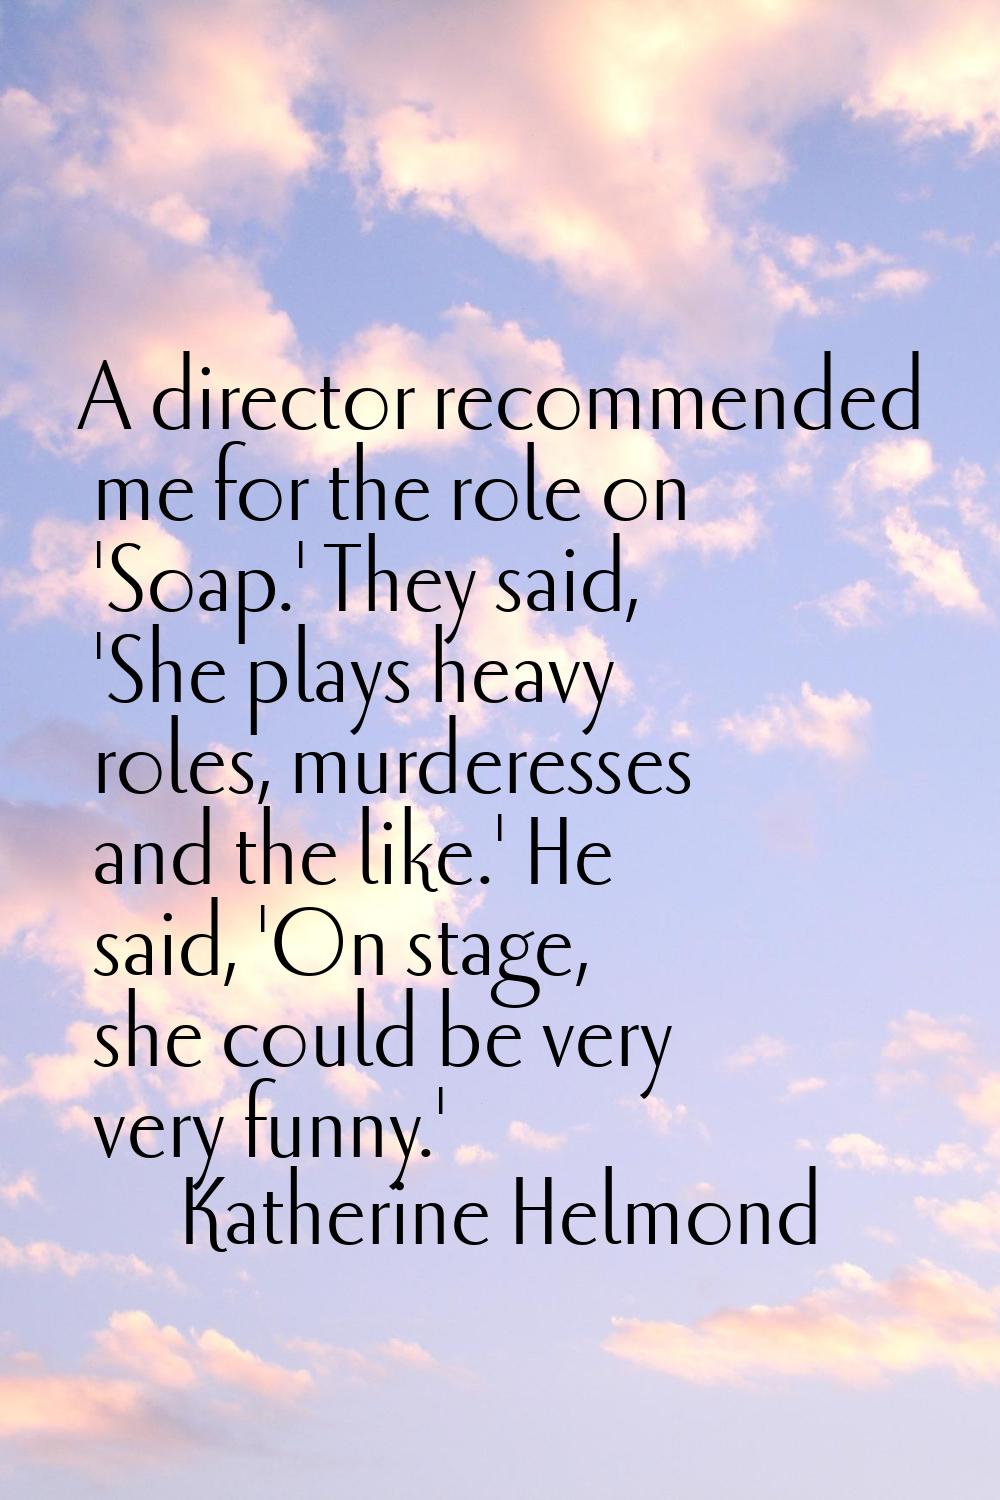 A director recommended me for the role on 'Soap.' They said, 'She plays heavy roles, murderesses an